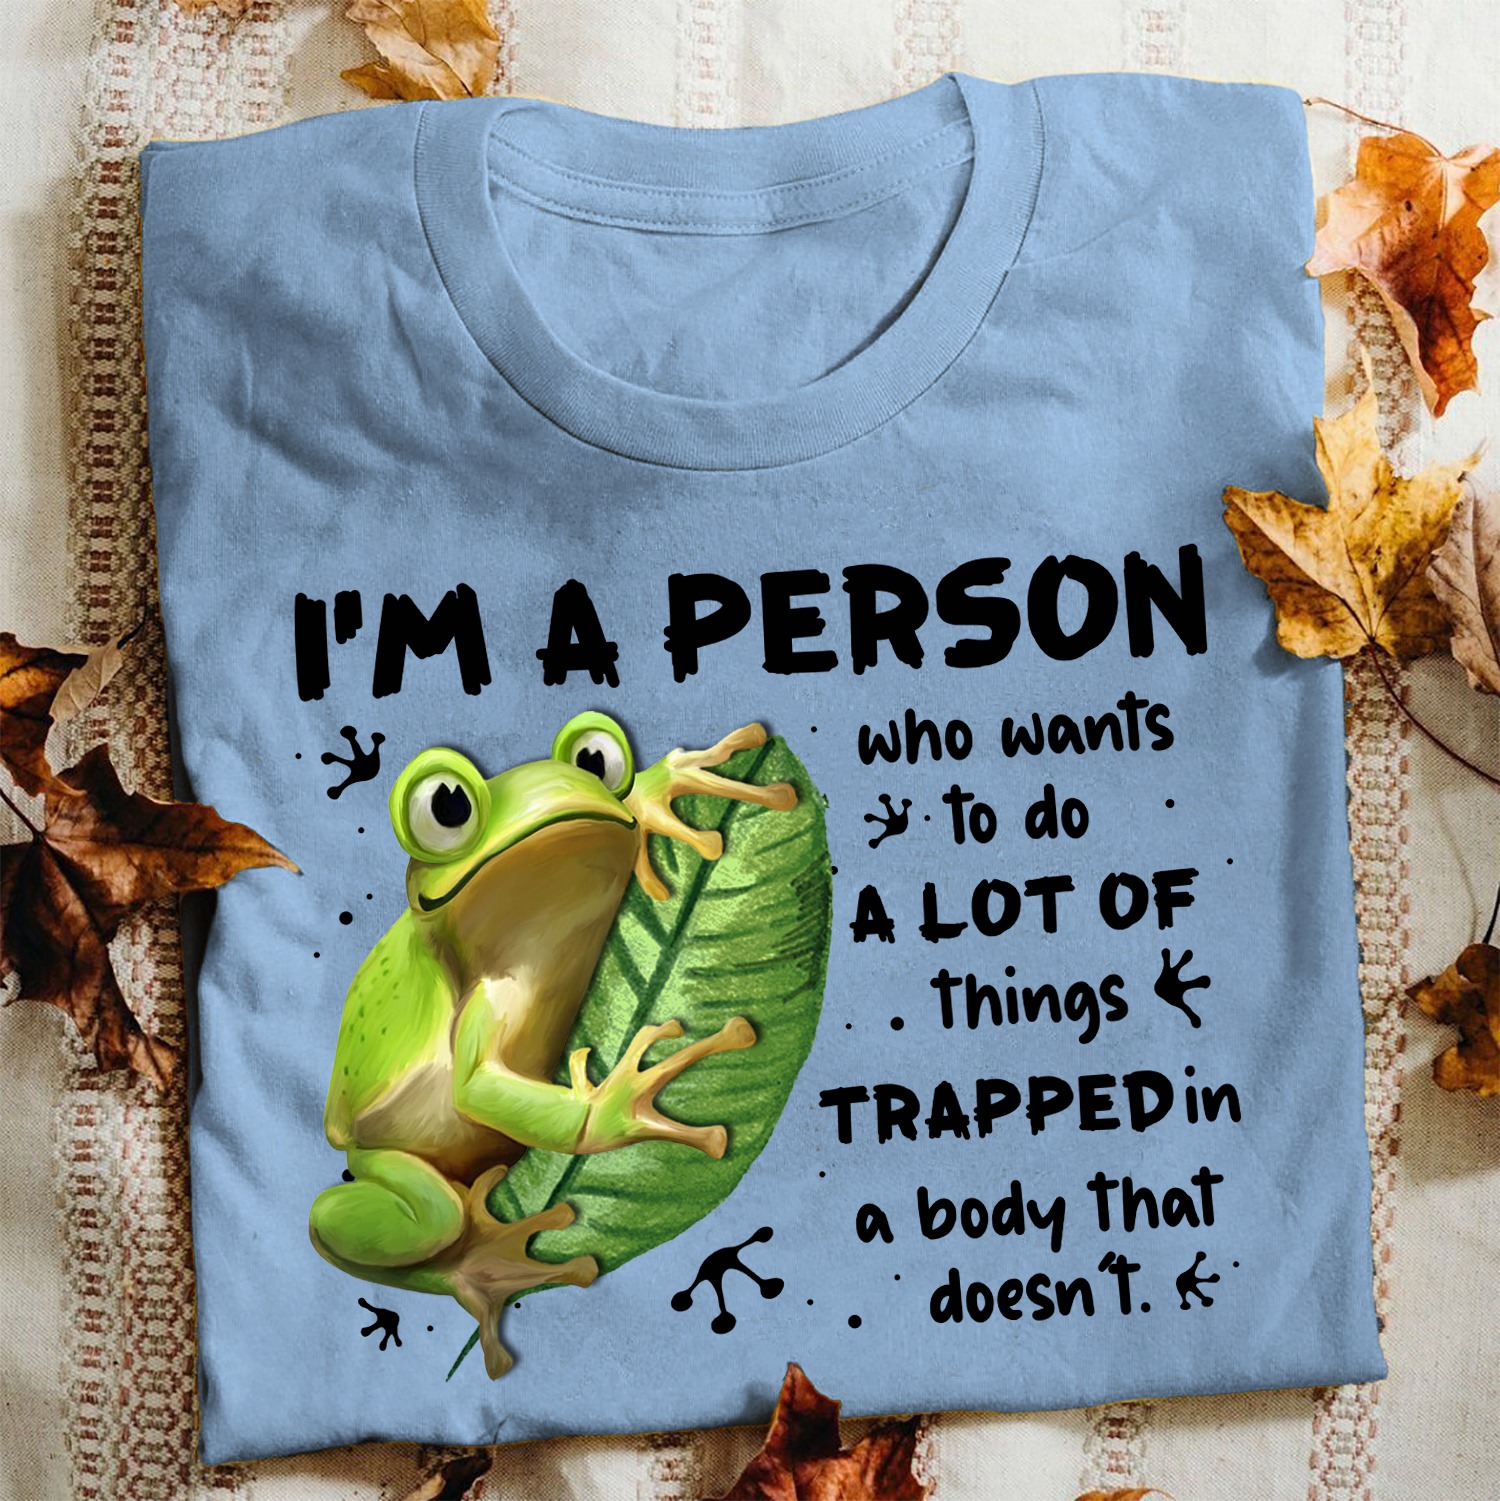 I'm a person who wants to do a lot of things trapped in a body that doesn't - Grumpy frog